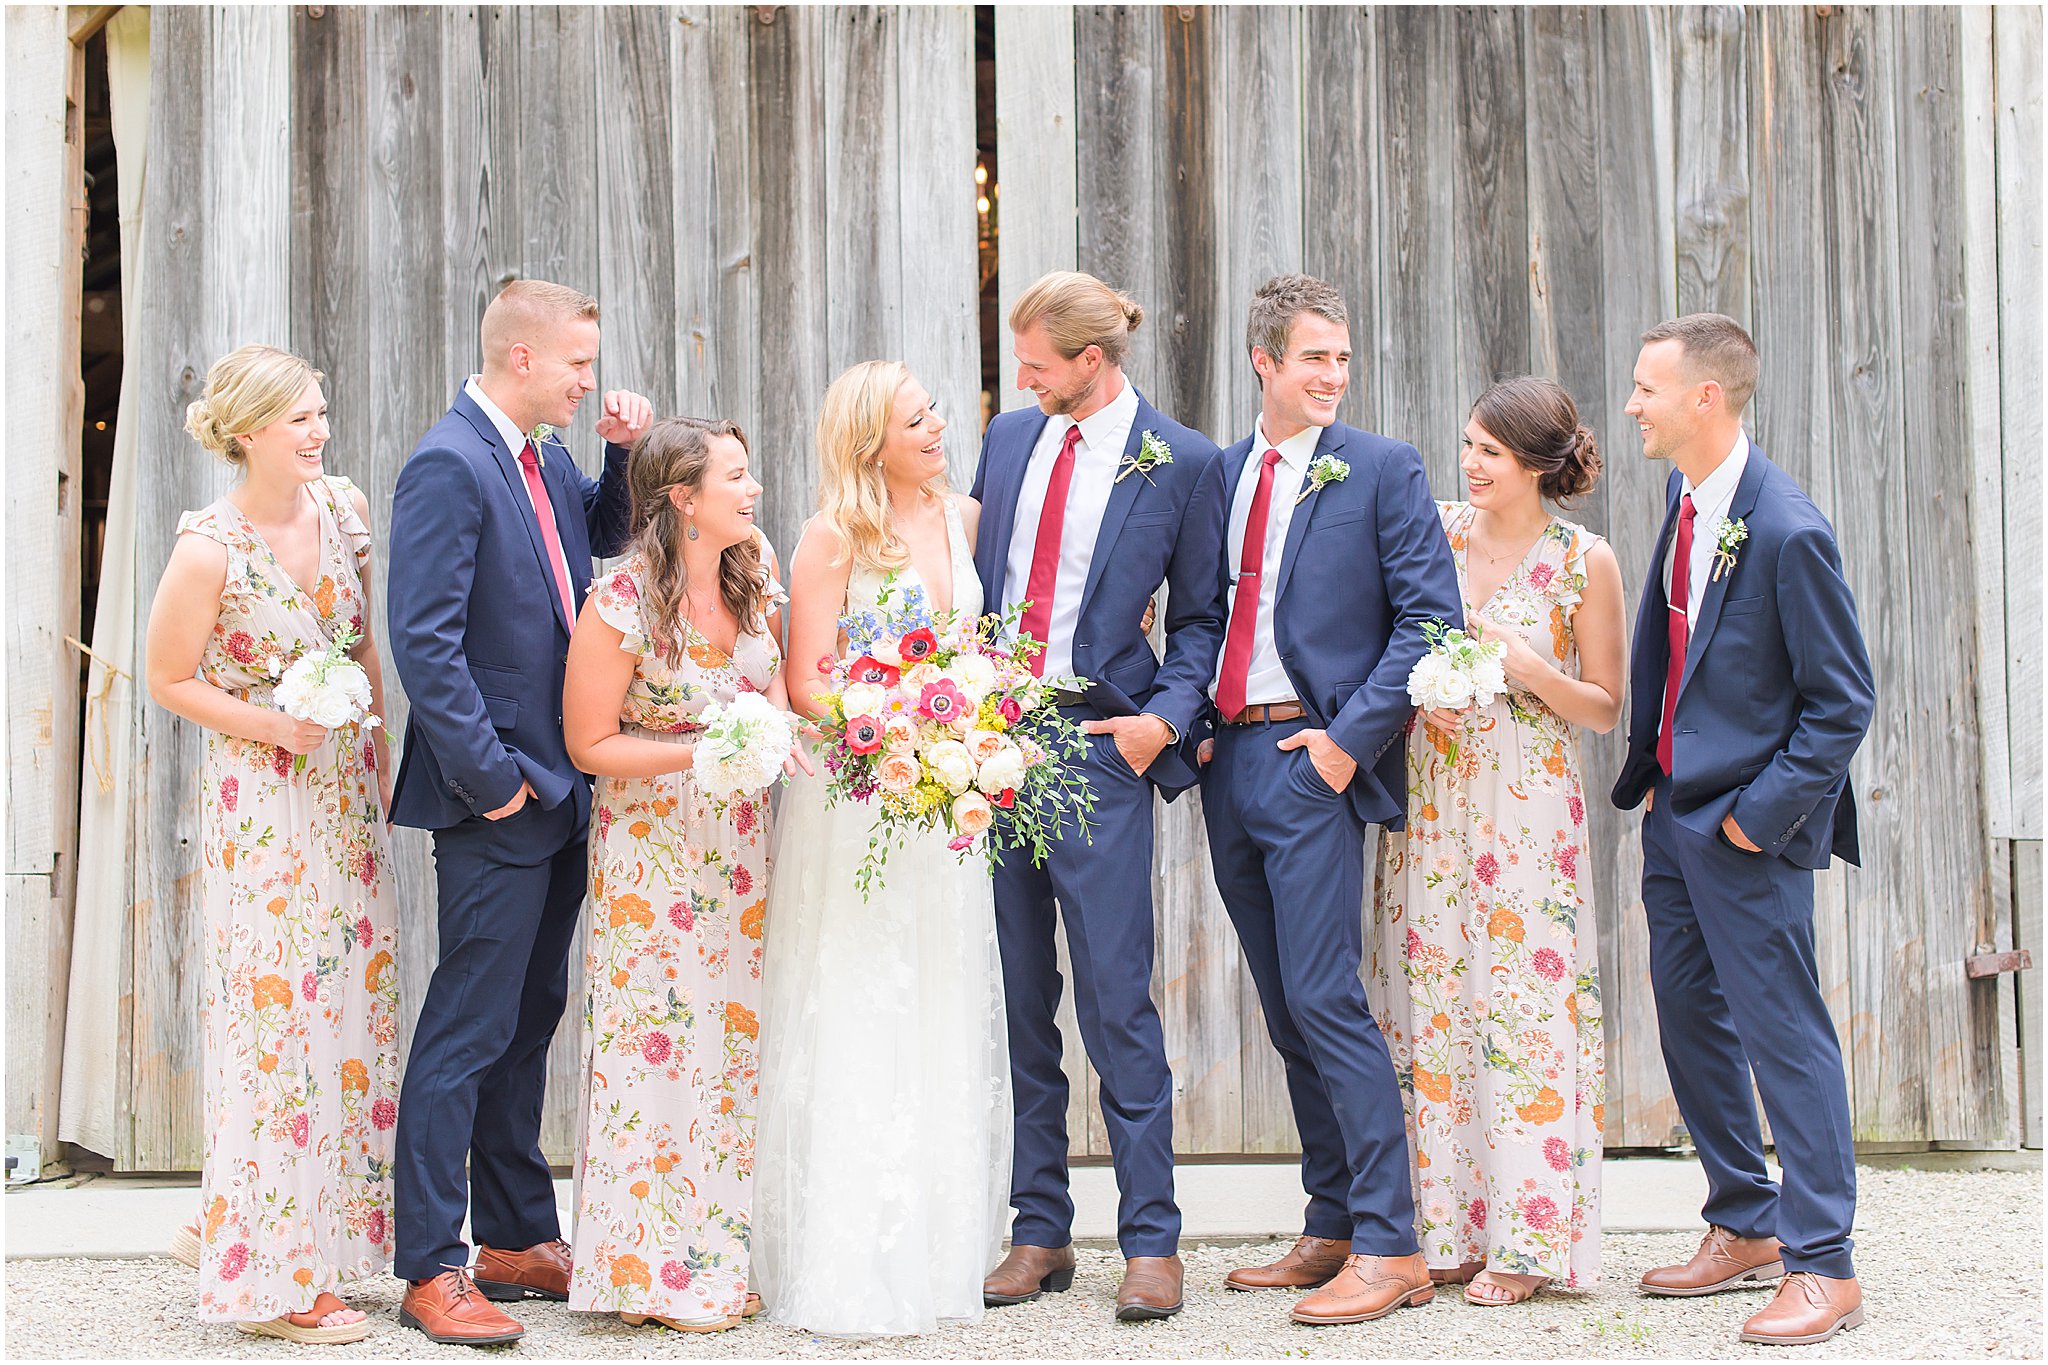 Bridal party laughing together The Old Barn At Brown County wedding